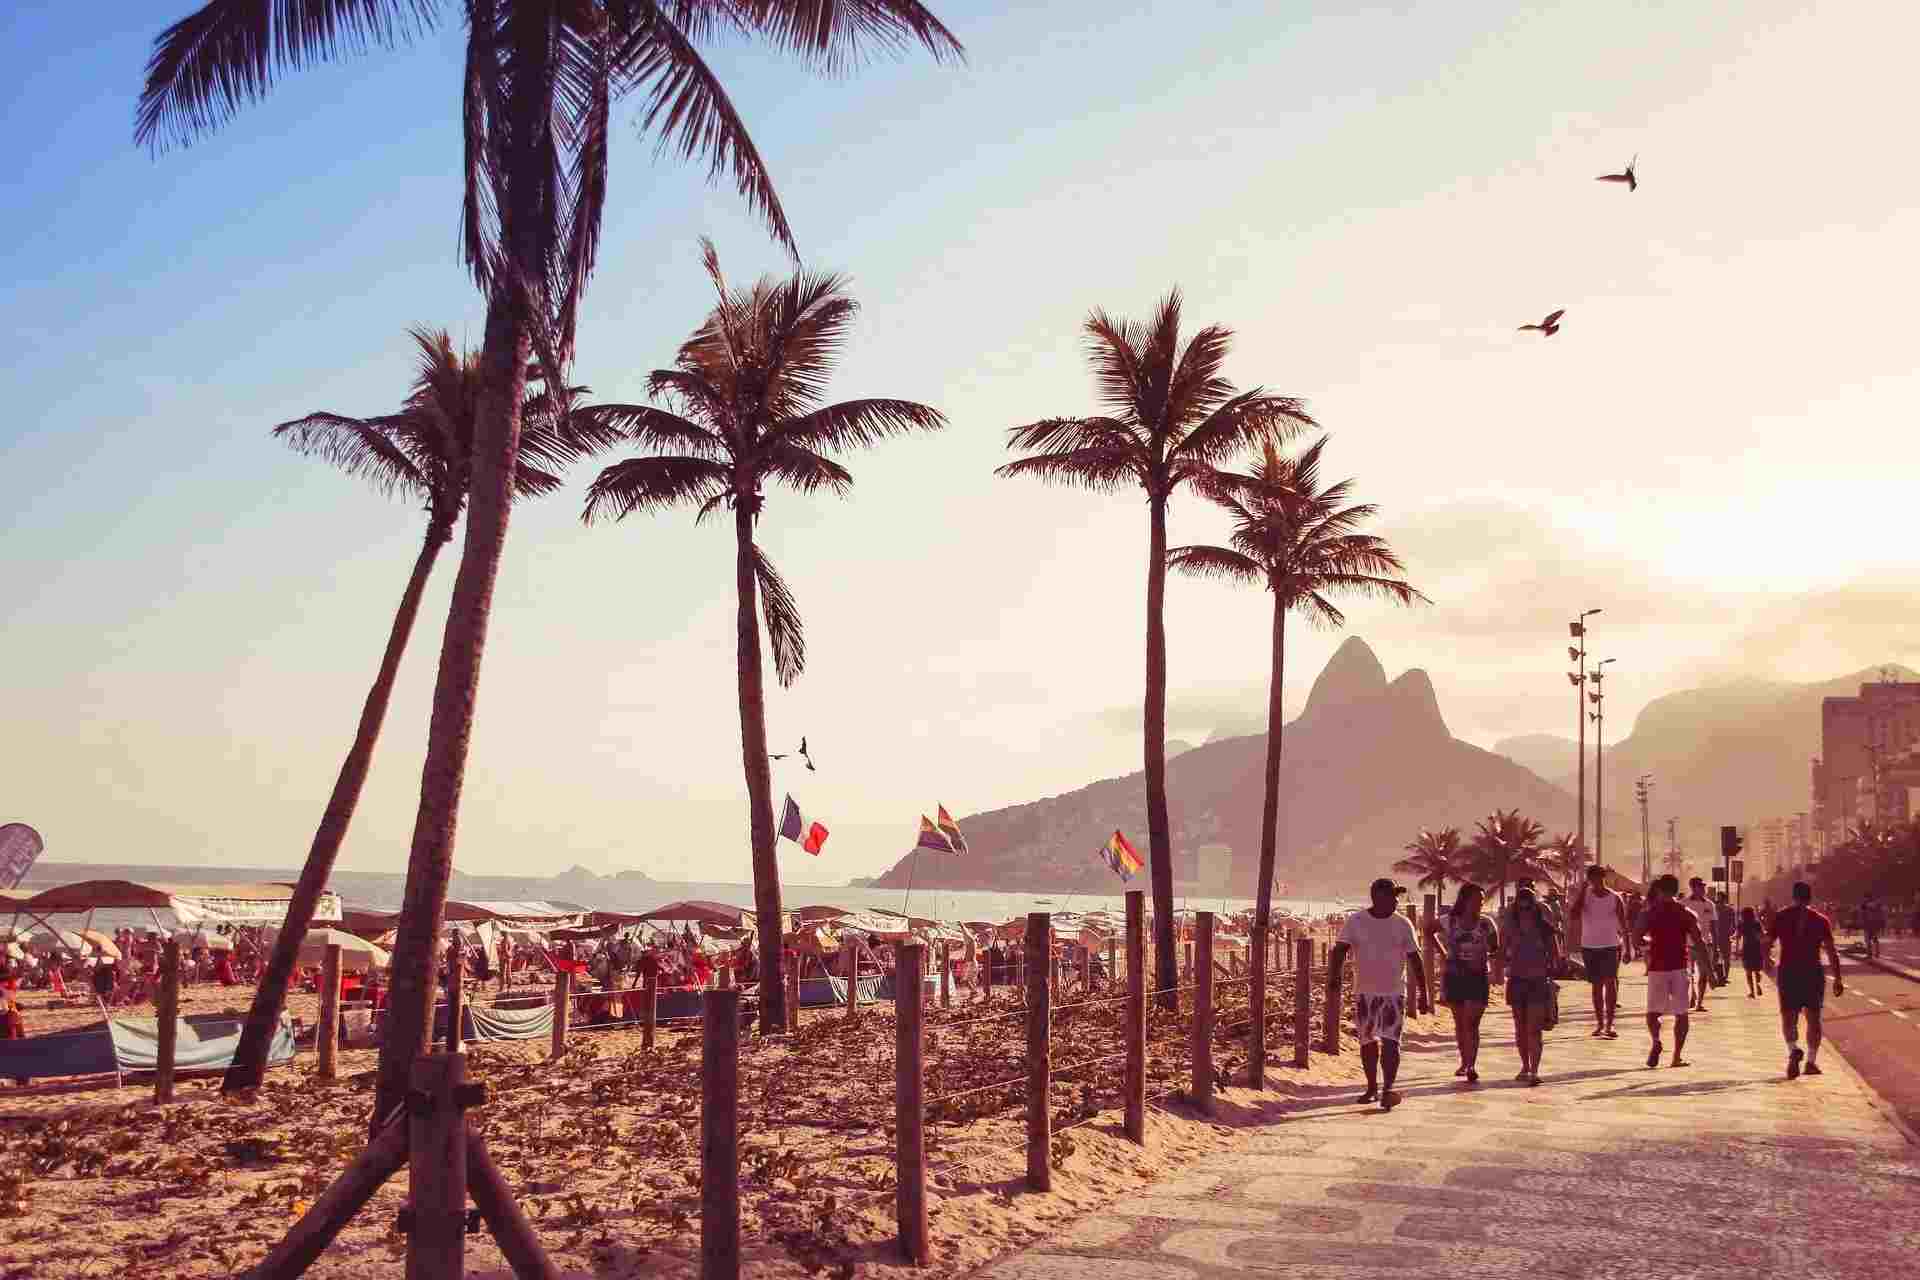 curious facts about beaches of brazil